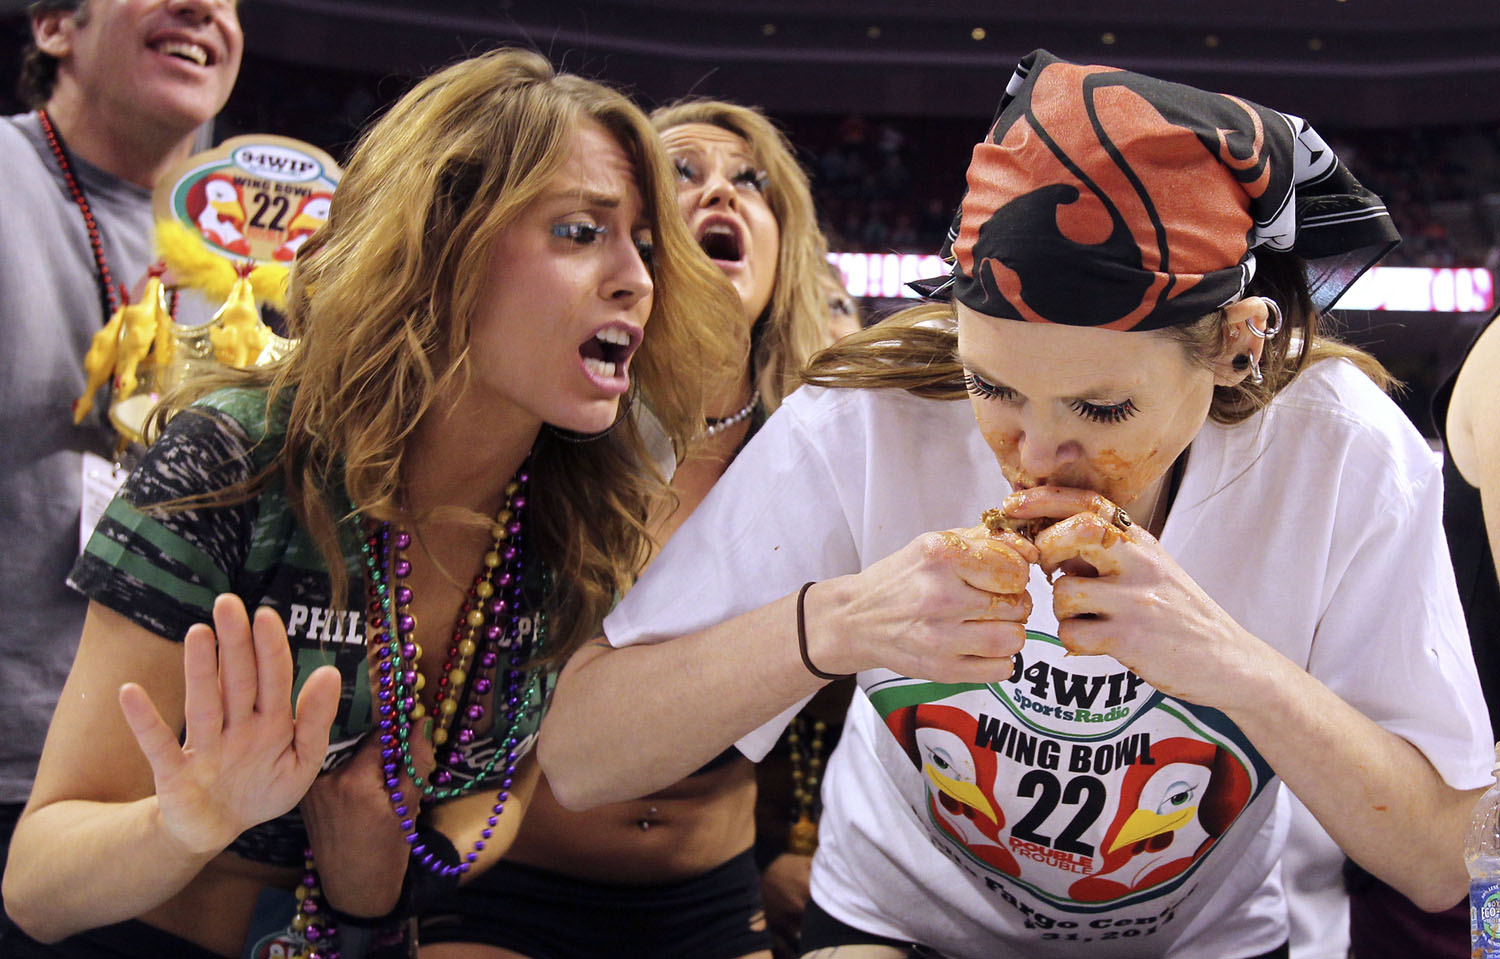 From left: A wingette cheers on contestant Molly Schuyler, of Omaha, Neb., during the Sportsradio 94 WIP's Wing Bowl 22 held at the Wells Fargo Center in Philadelphia, on Jan. 31, 2014. (Alejandro A. Alvarez—Philadelphia Daily News/AP)